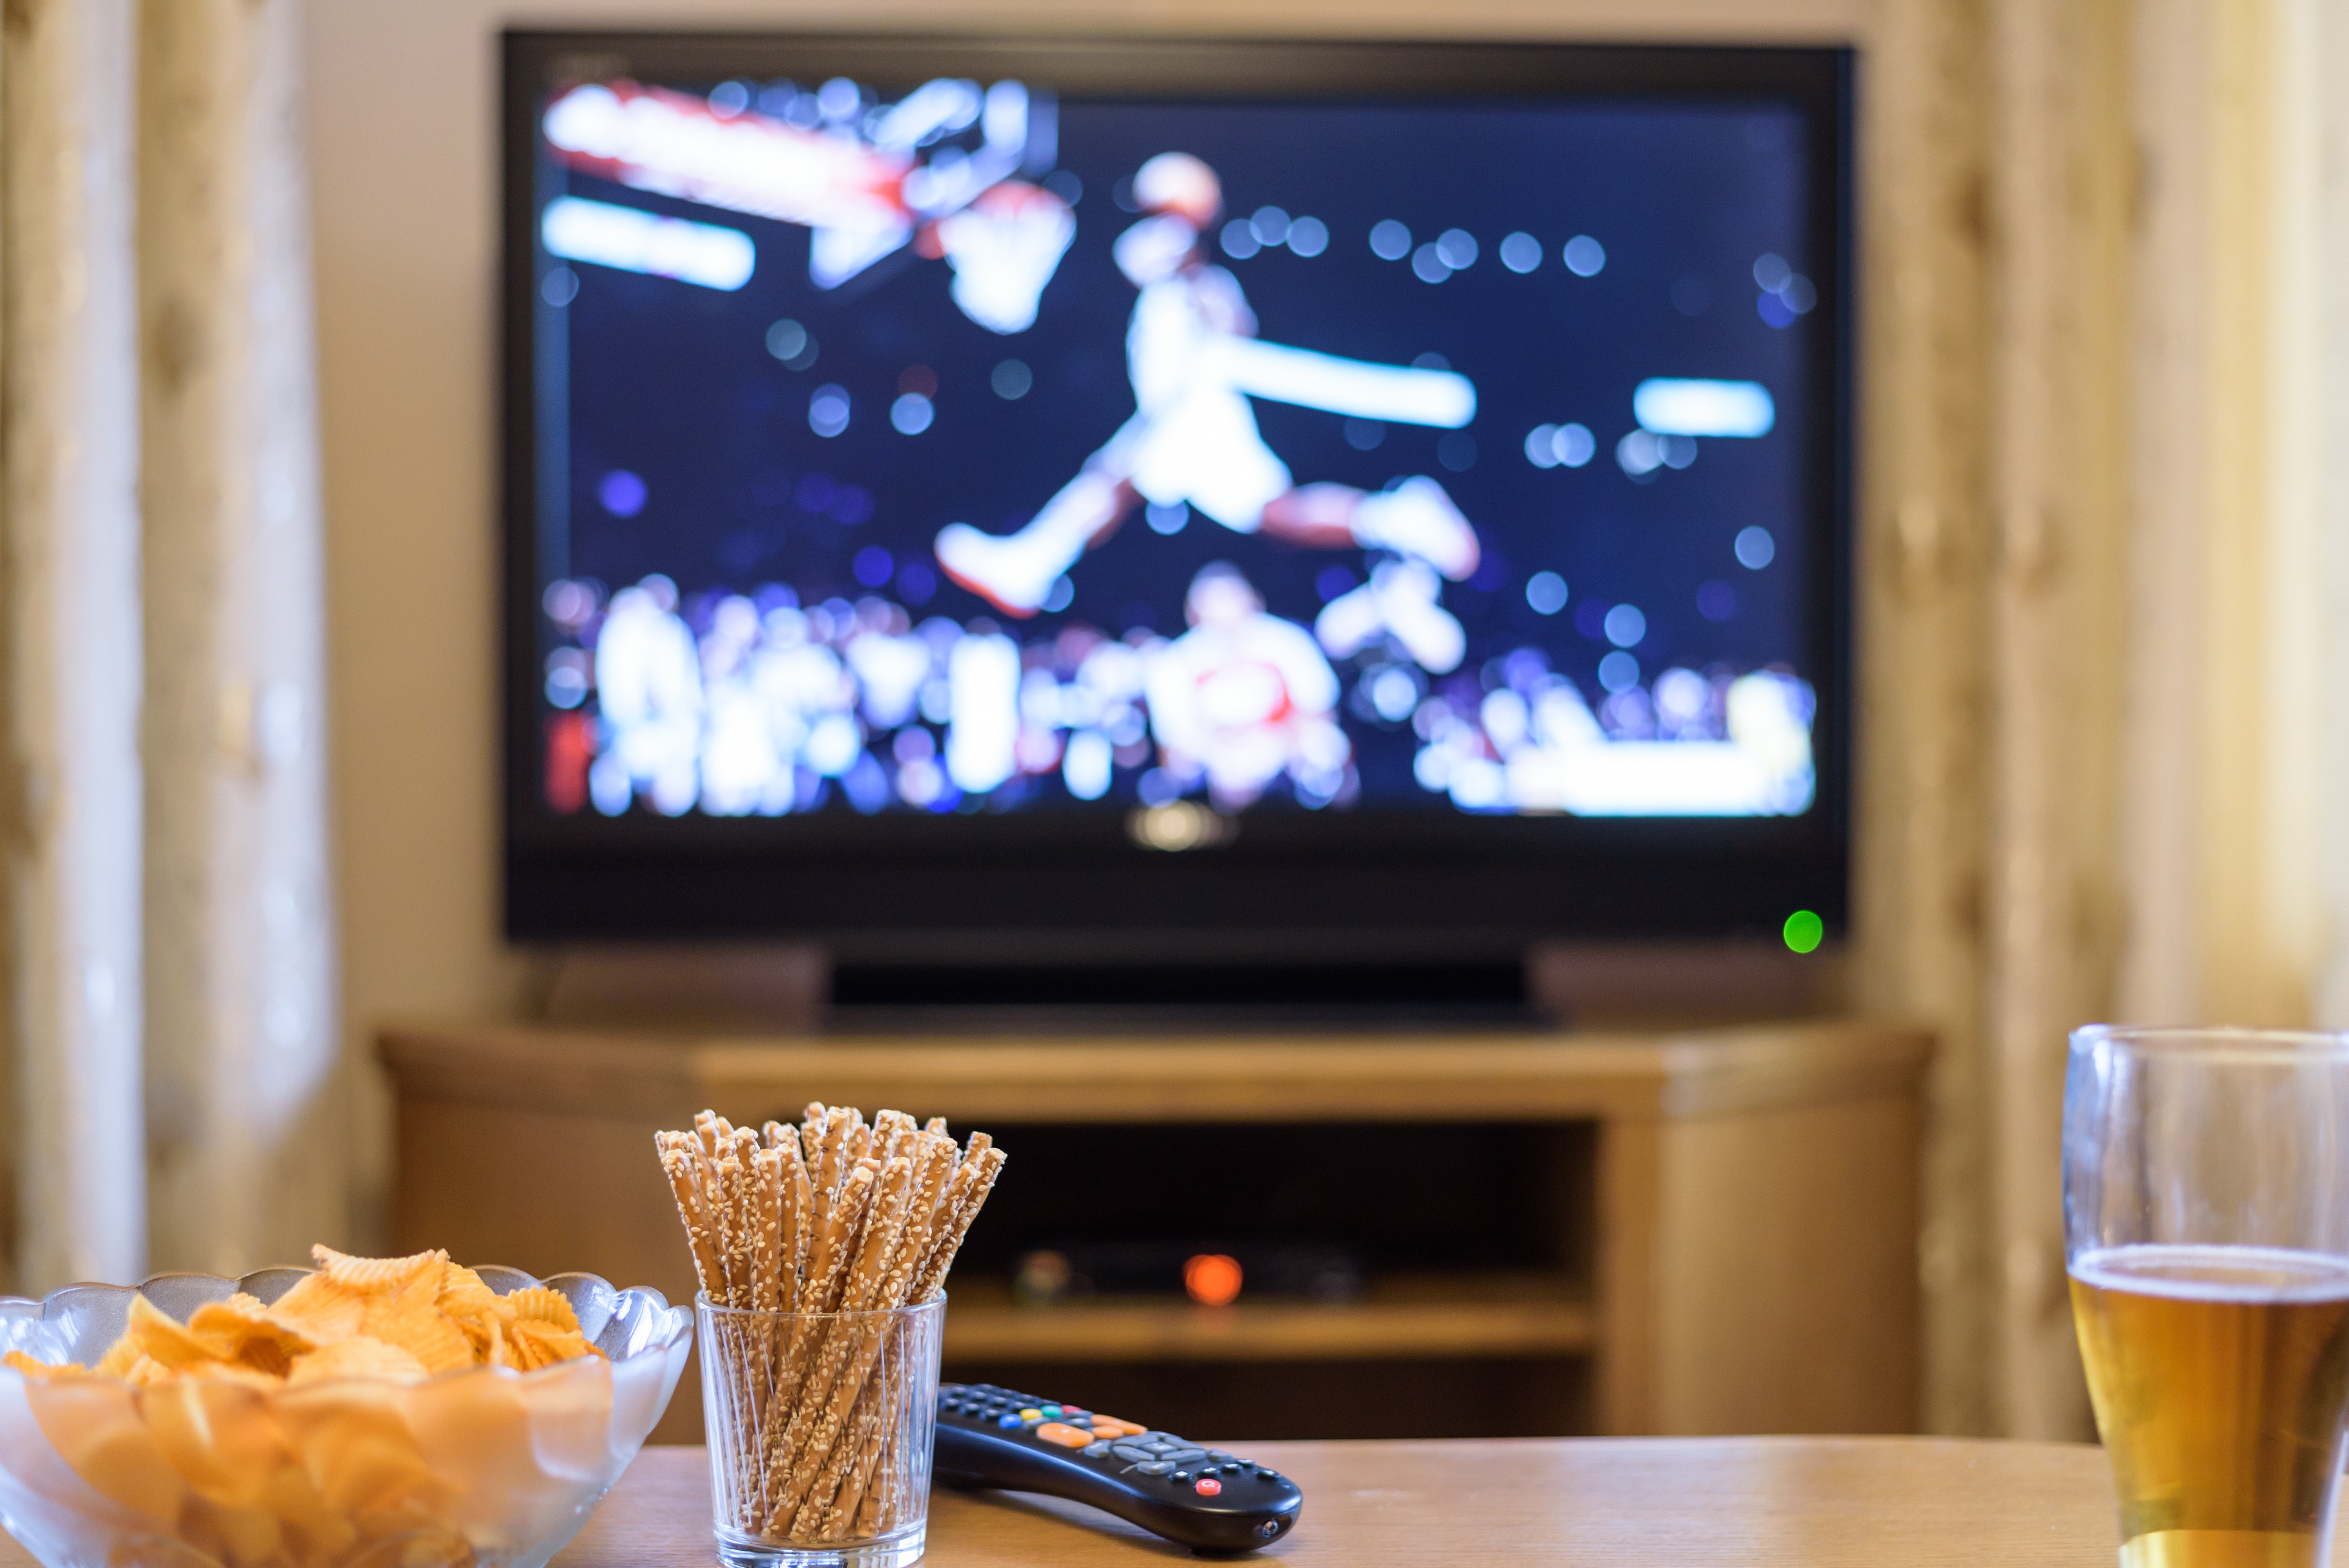 Snacks on a coffee table set against the backdrop of a basketball game on television | Source: Shutterstock